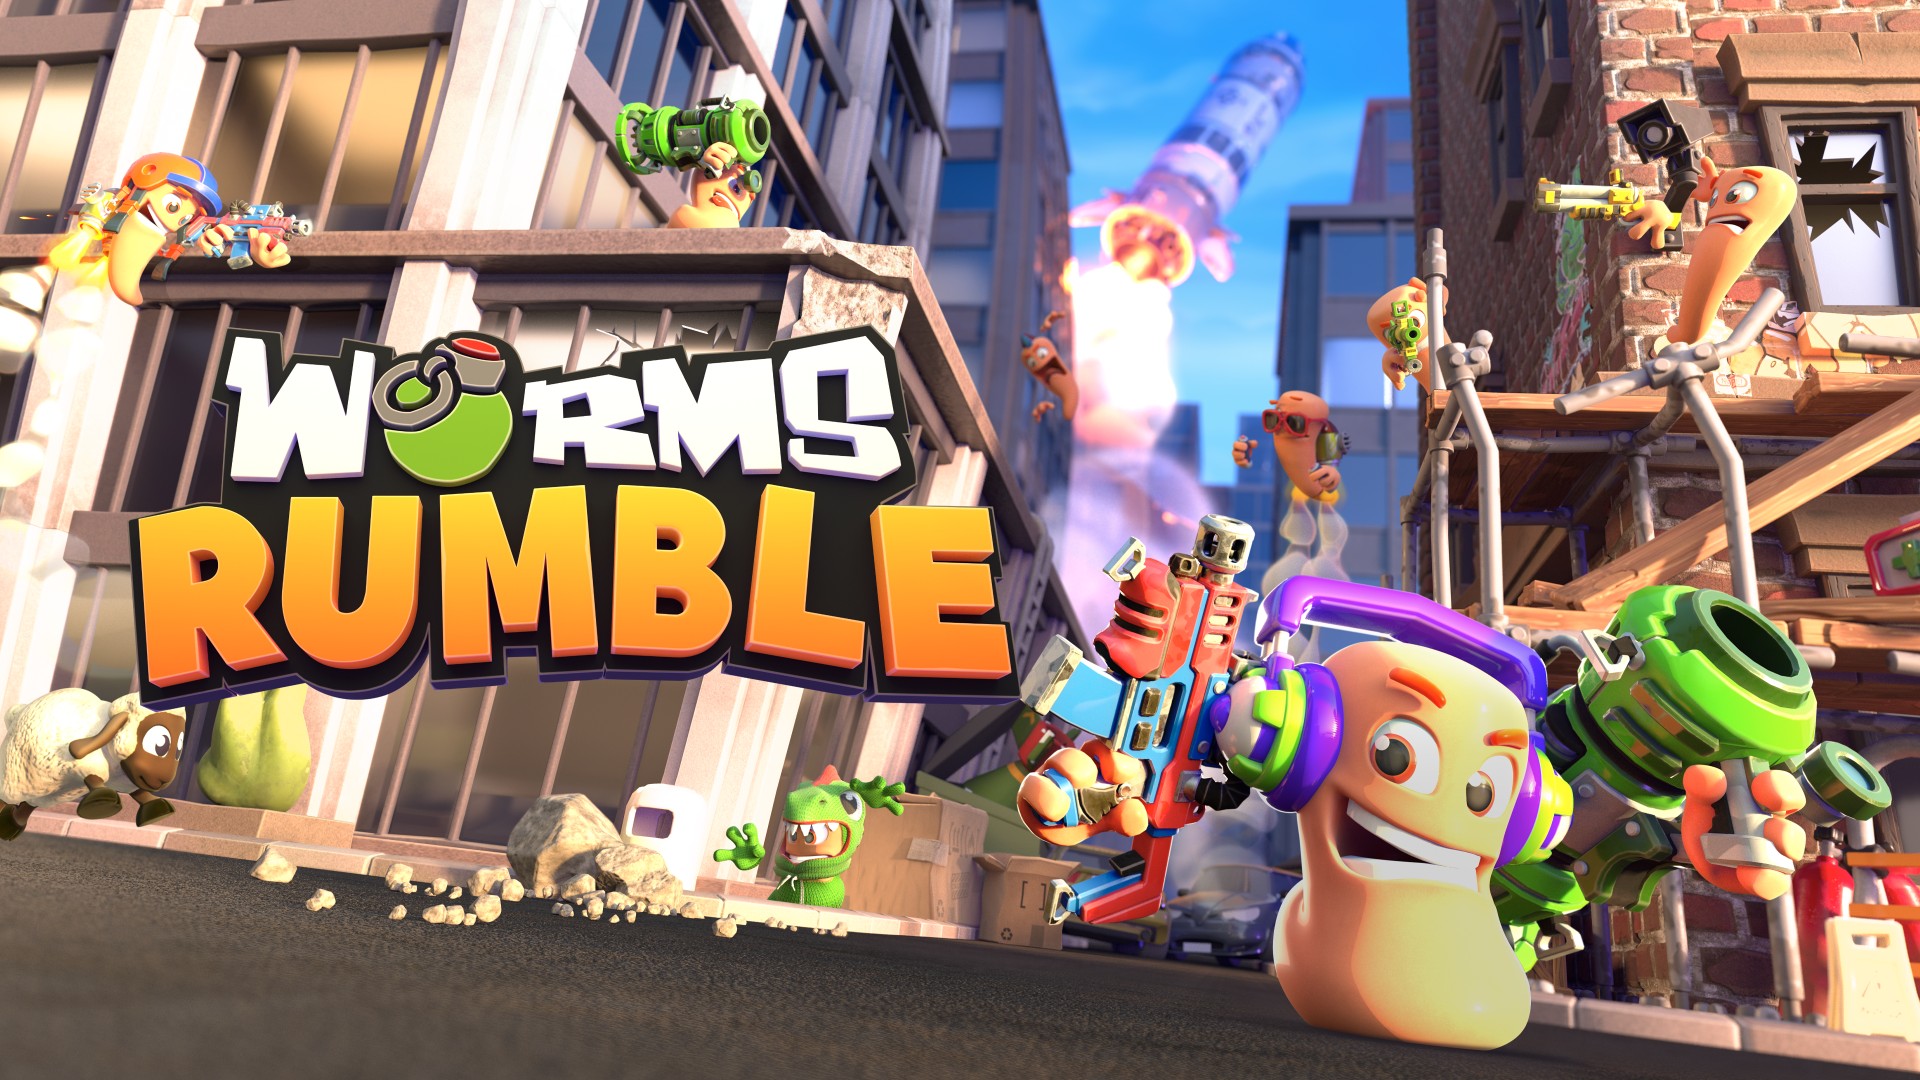 Worms Rumble (Cloud, Console, and PC) ID@Xbox – Available Today